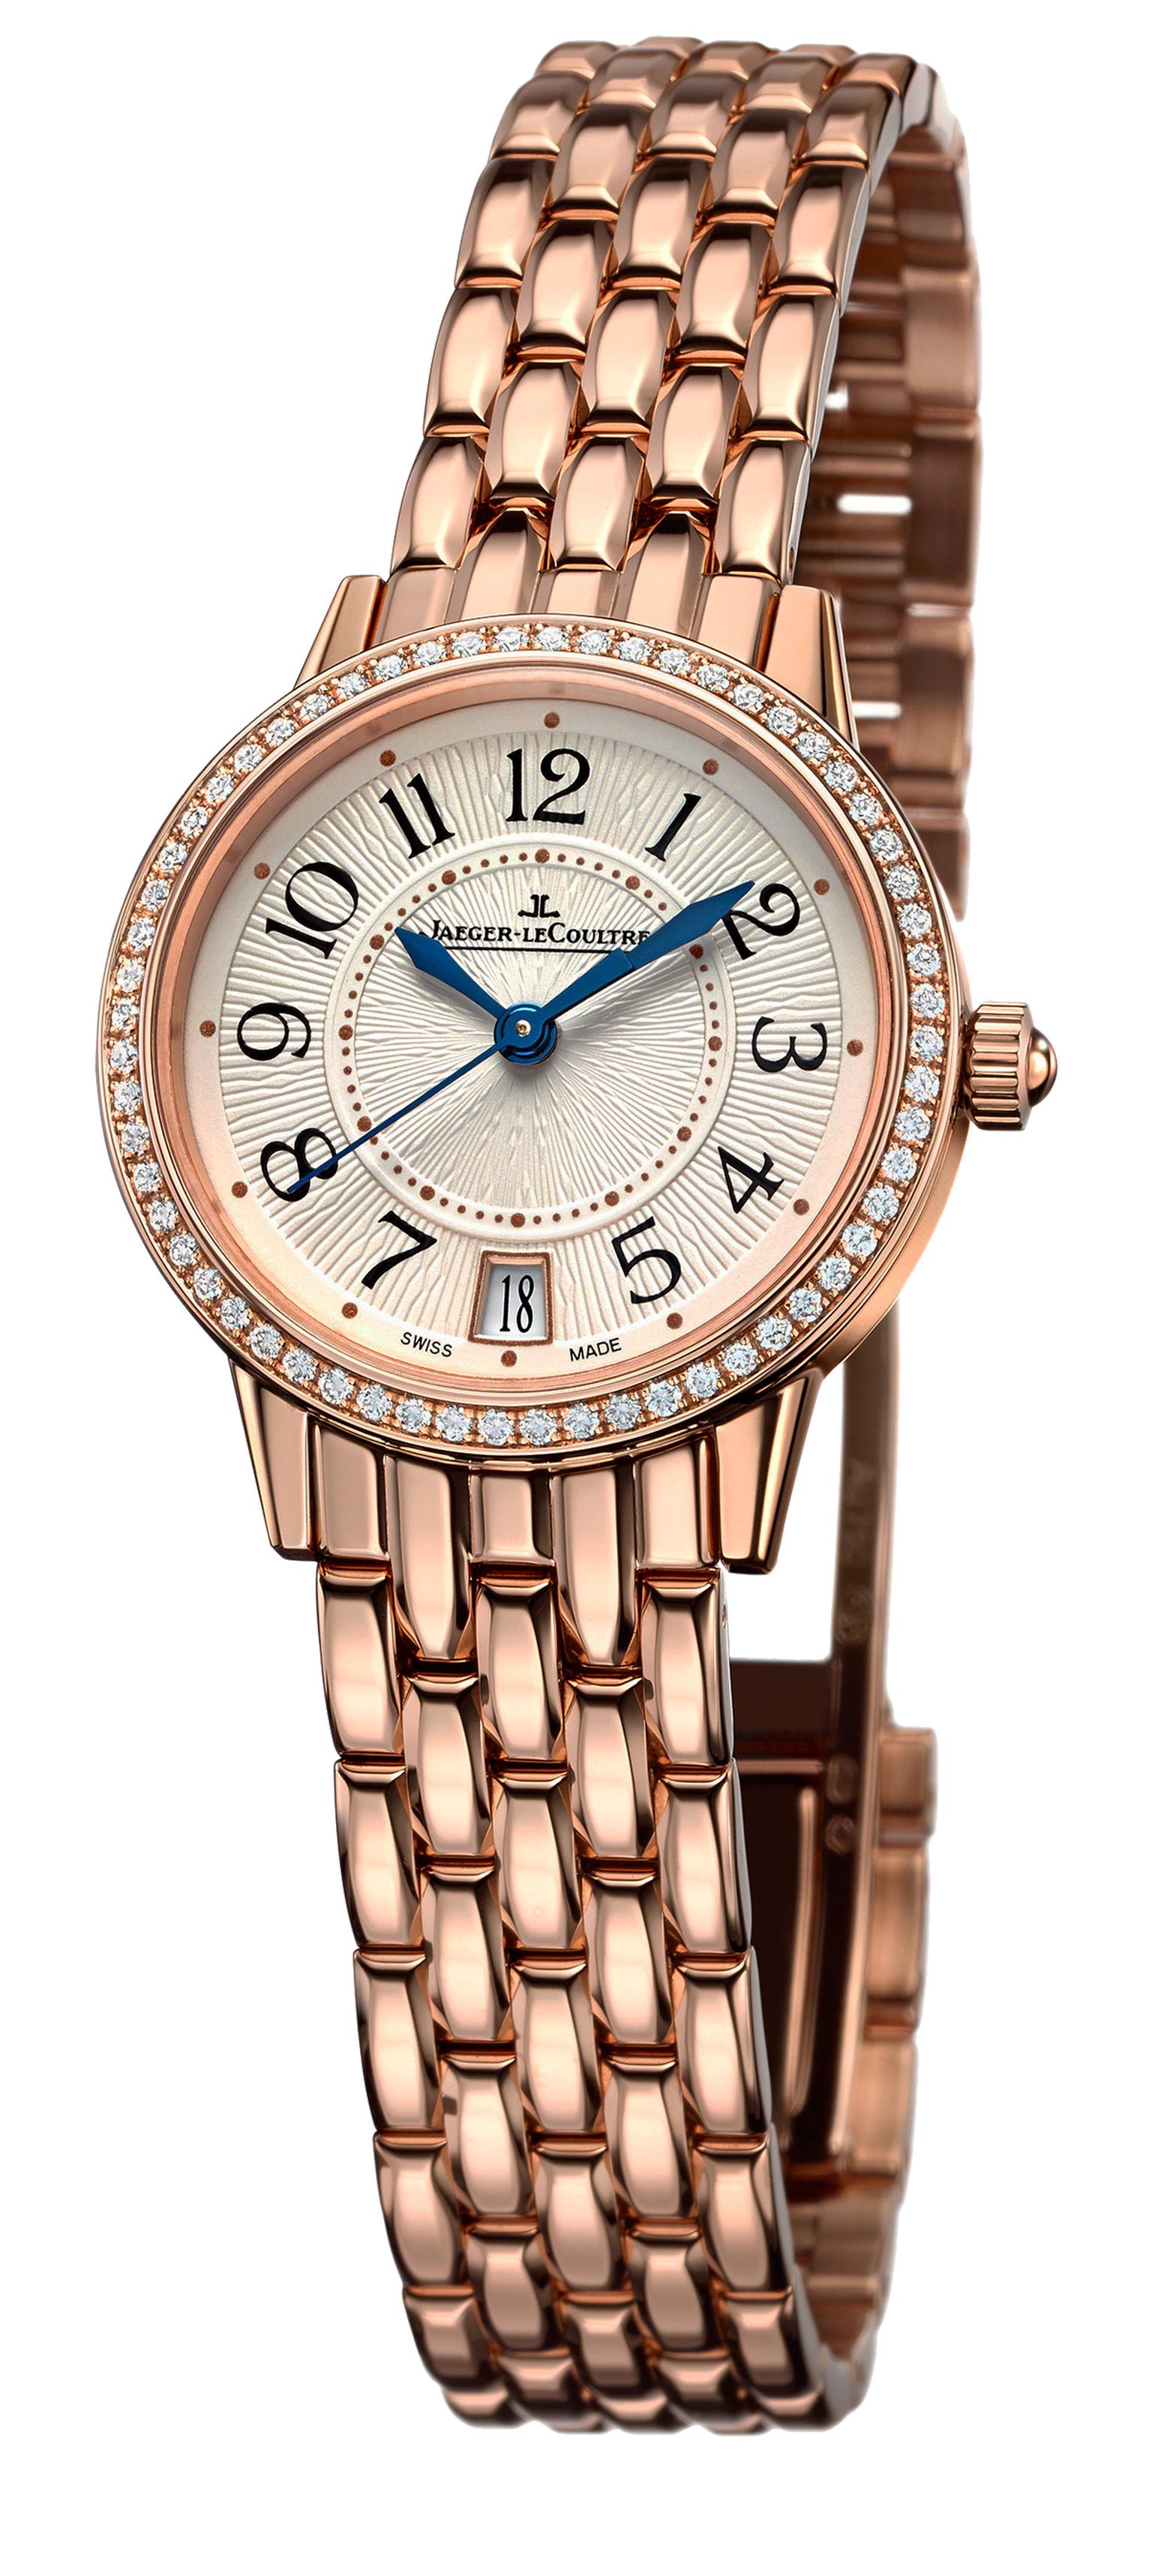 Jaeger-LeCoultre Rendez Vous Date pink gold and diamonds_20140212_Zoom